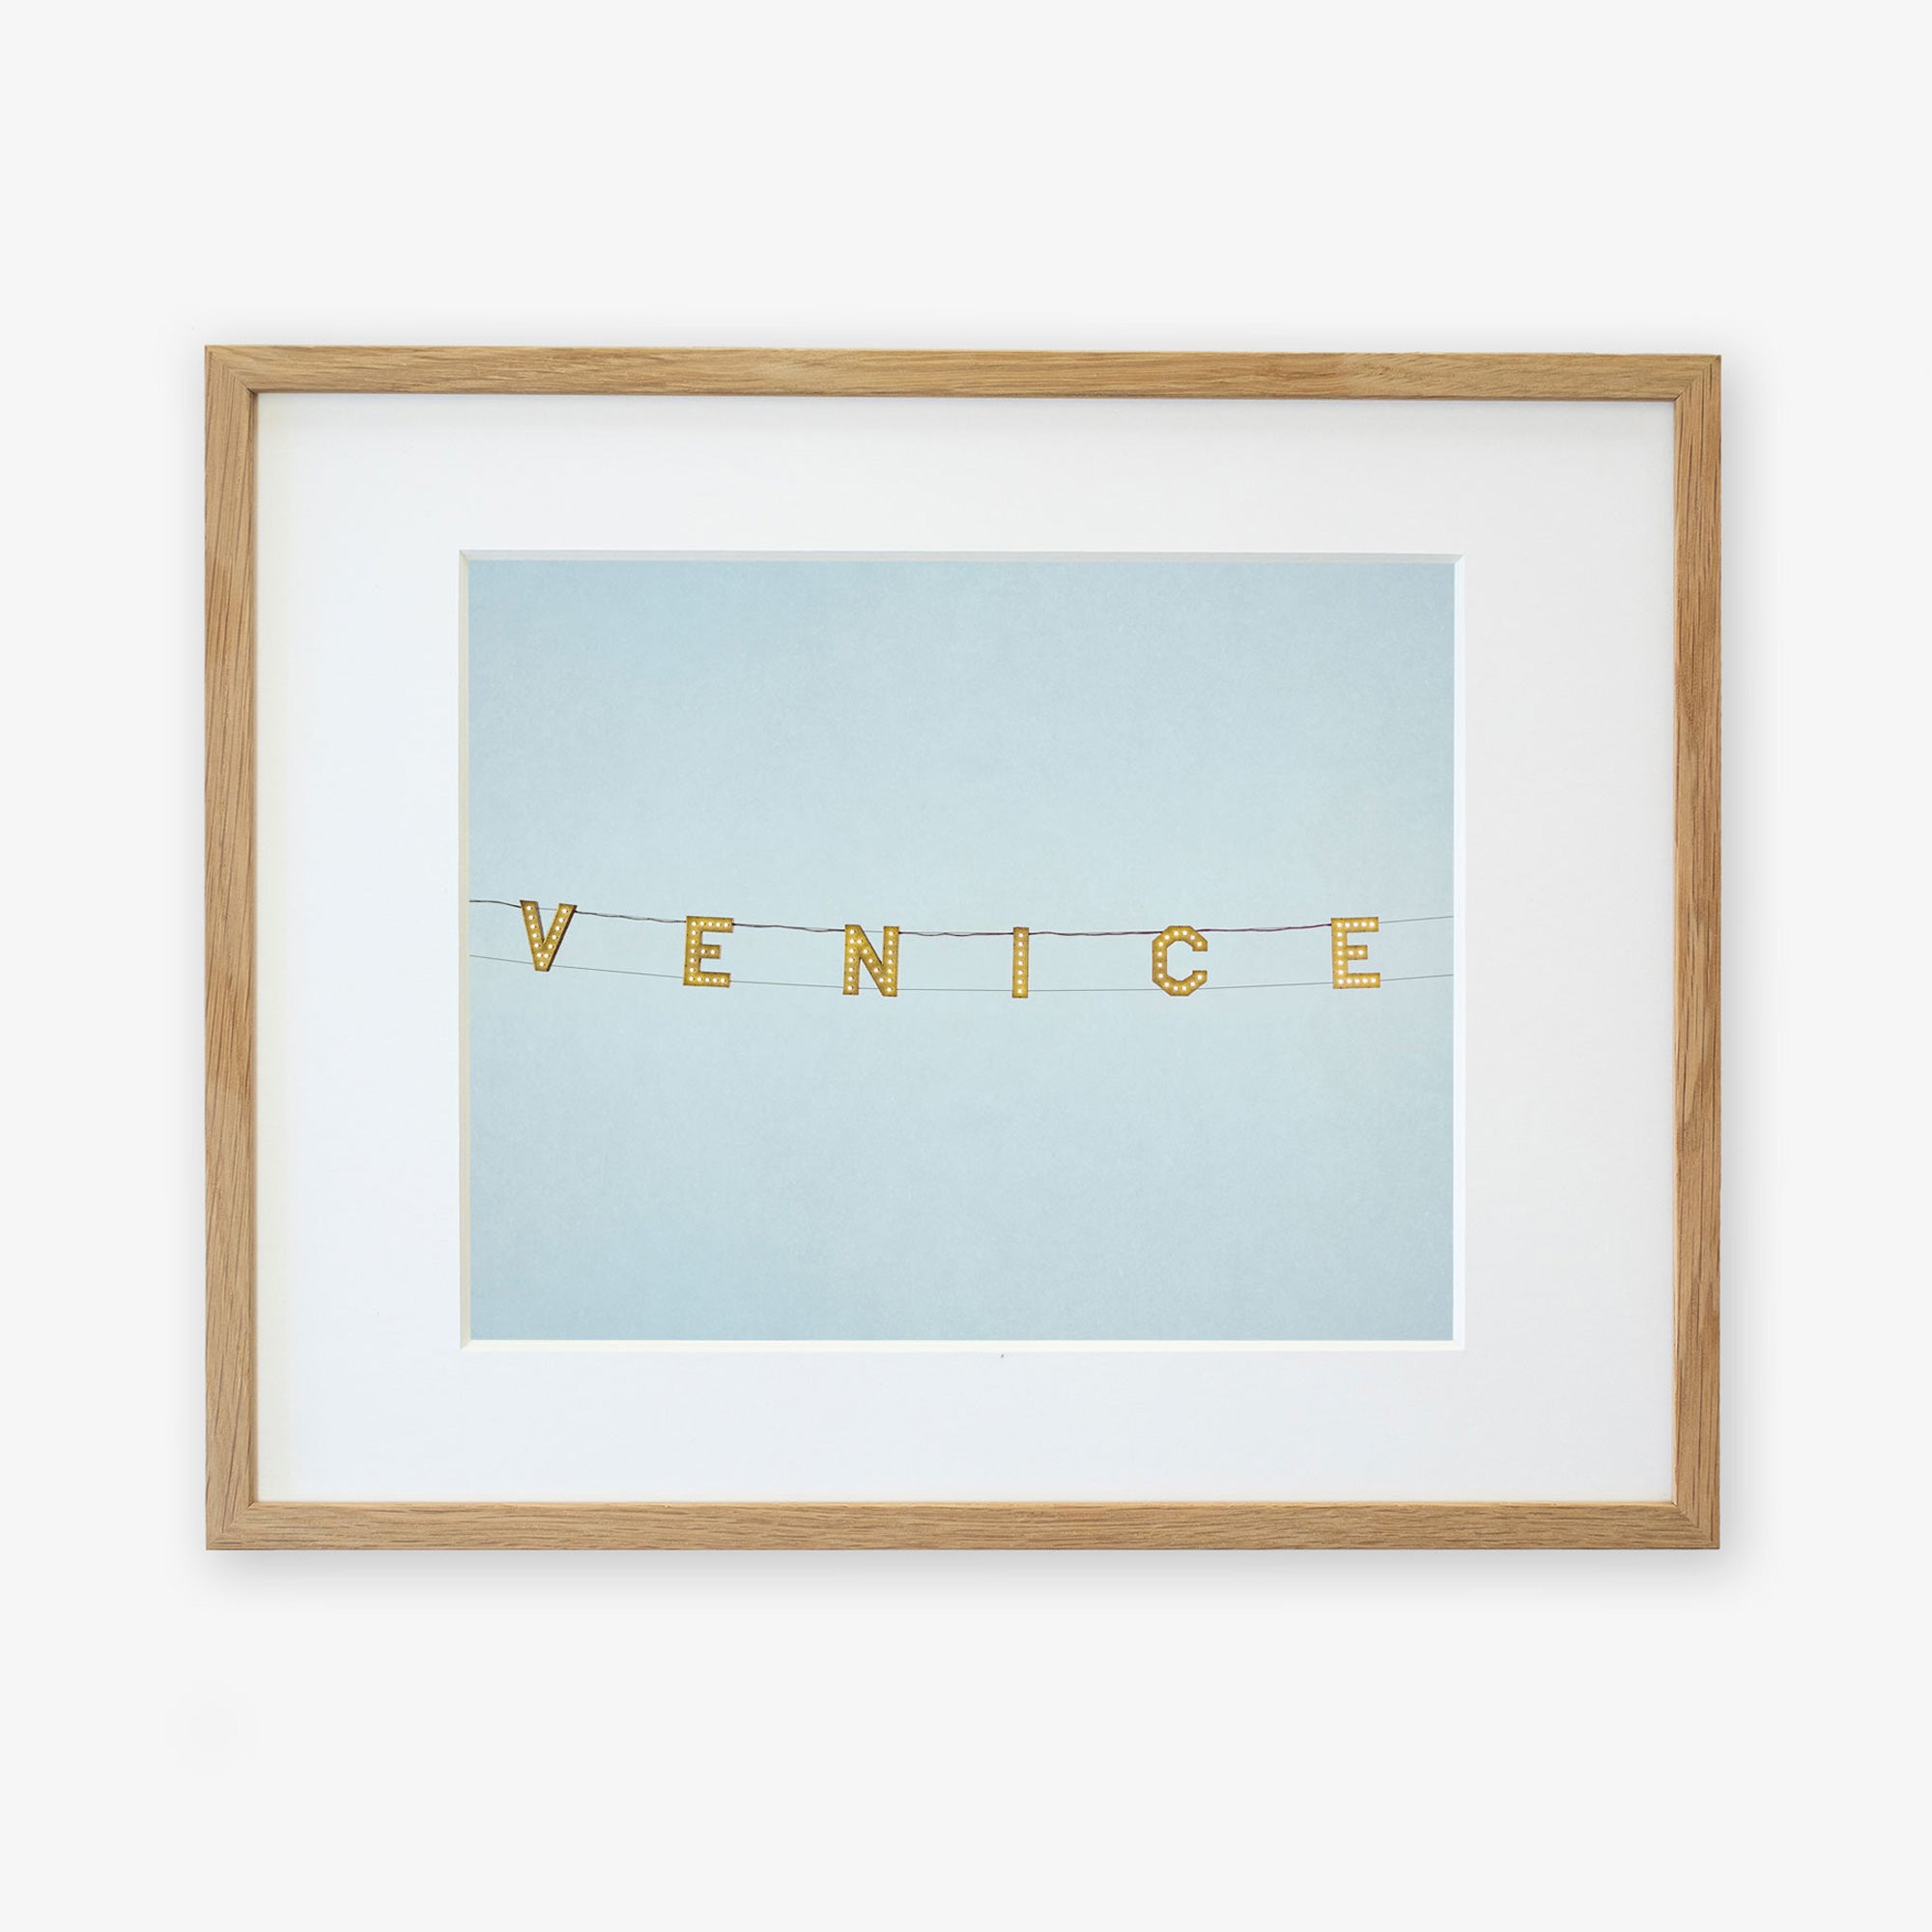 A framed wall art features the product &quot;Venice Beach Sign Print, &#39;Blue Venice&#39;&quot; spelled out on small square tiles that are strung together, displayed against a pale blue background on archival photographic paper by Offley Green.